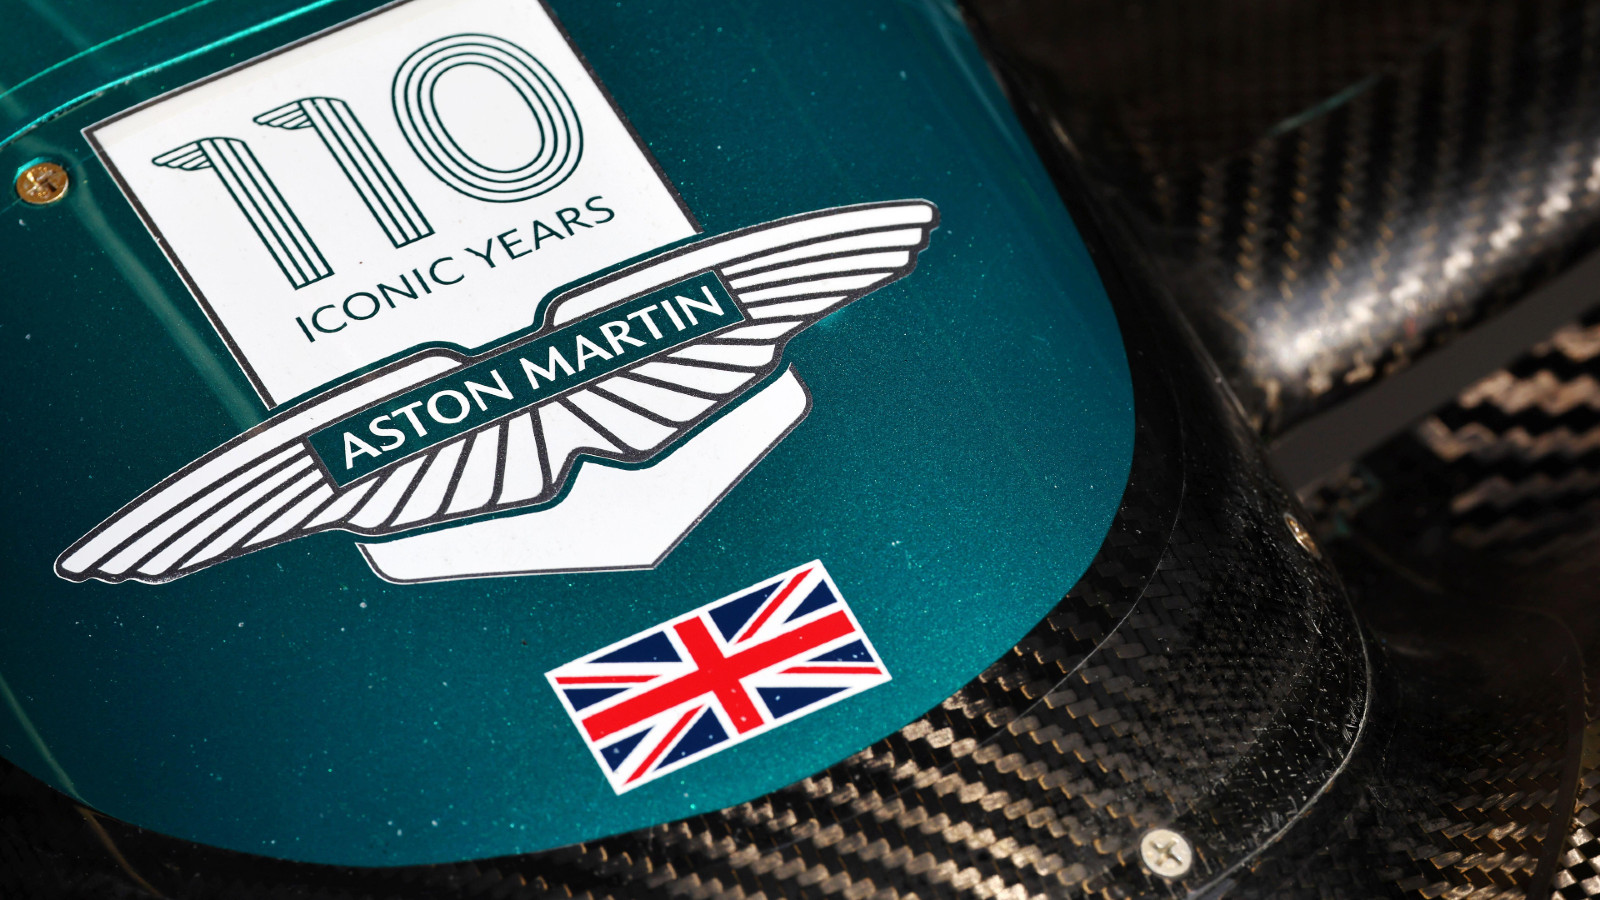 A Look Back At The Iconic Aston Martin F1 Logo